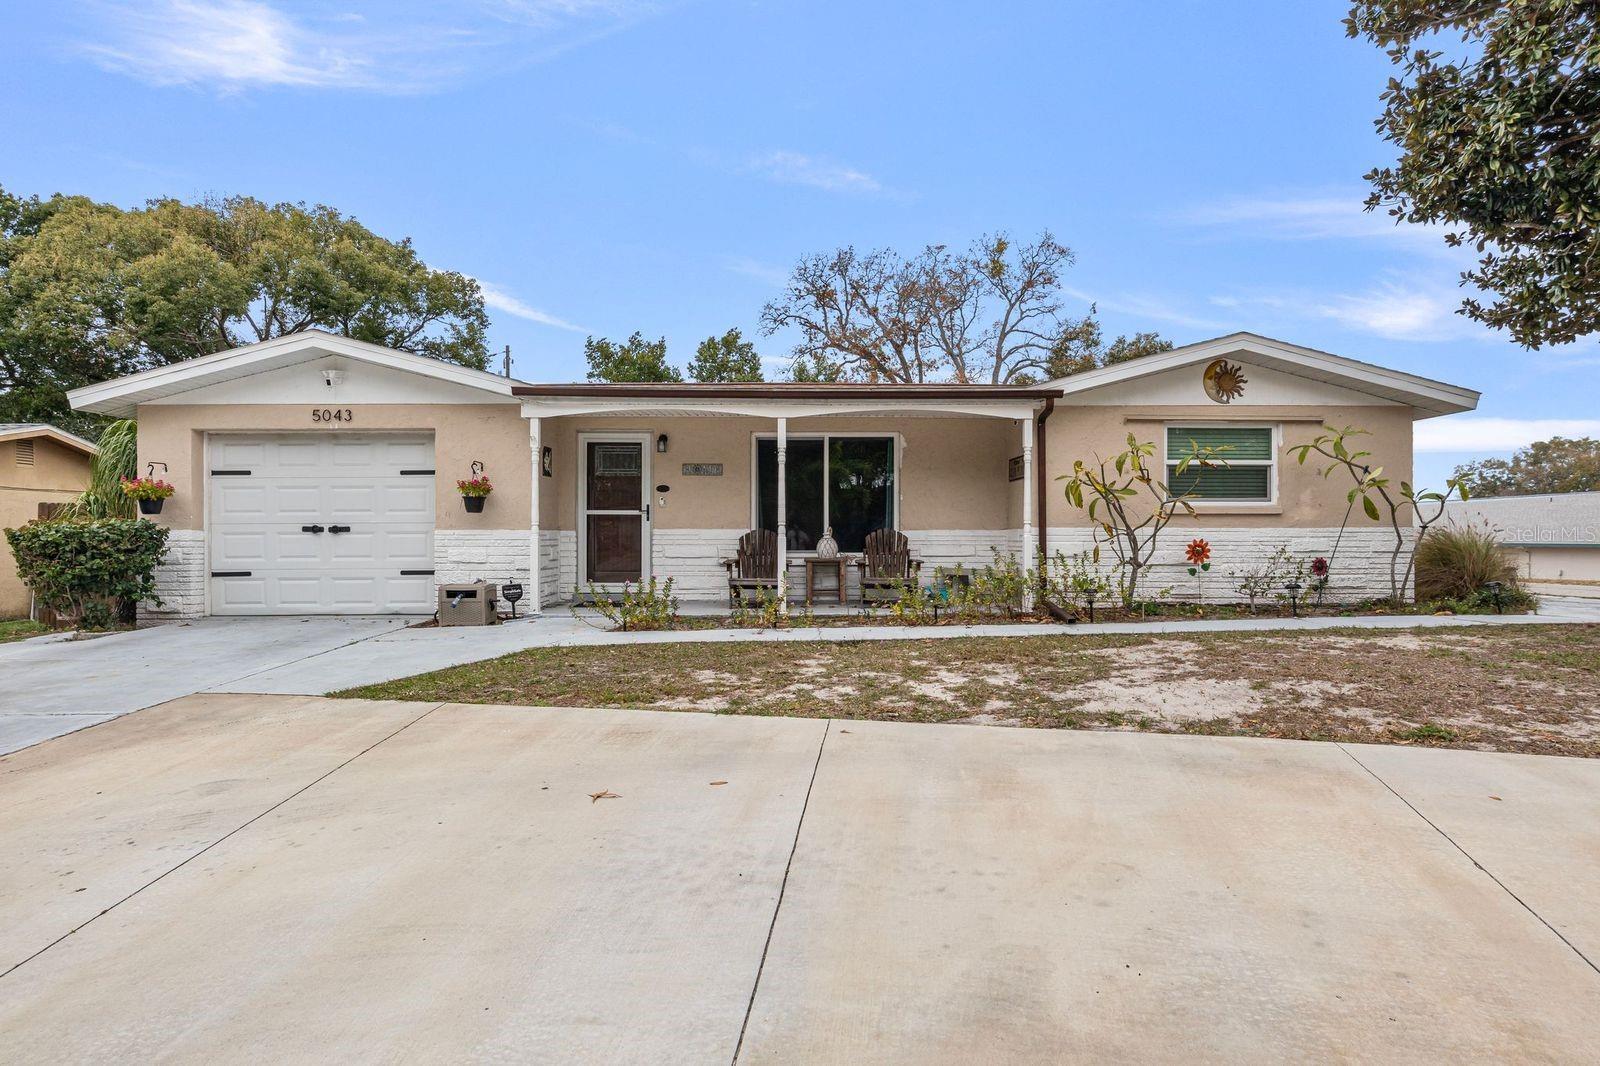 Photo one of 5043 Overlook Dr New Port Richey FL 34652 | MLS T3505115